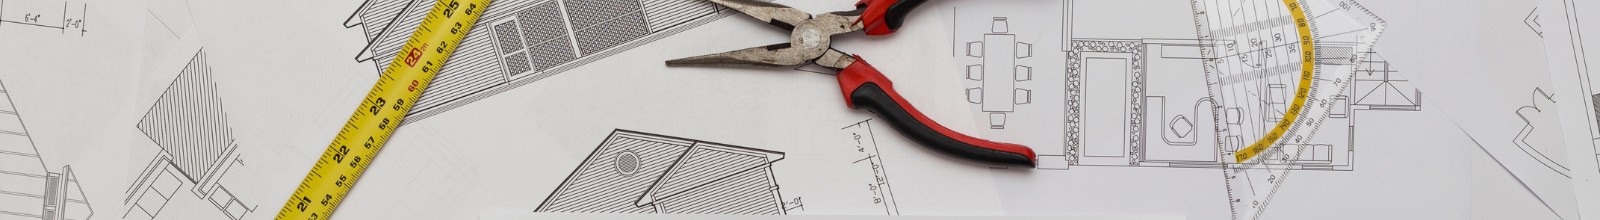 A table with building plans and tools on it